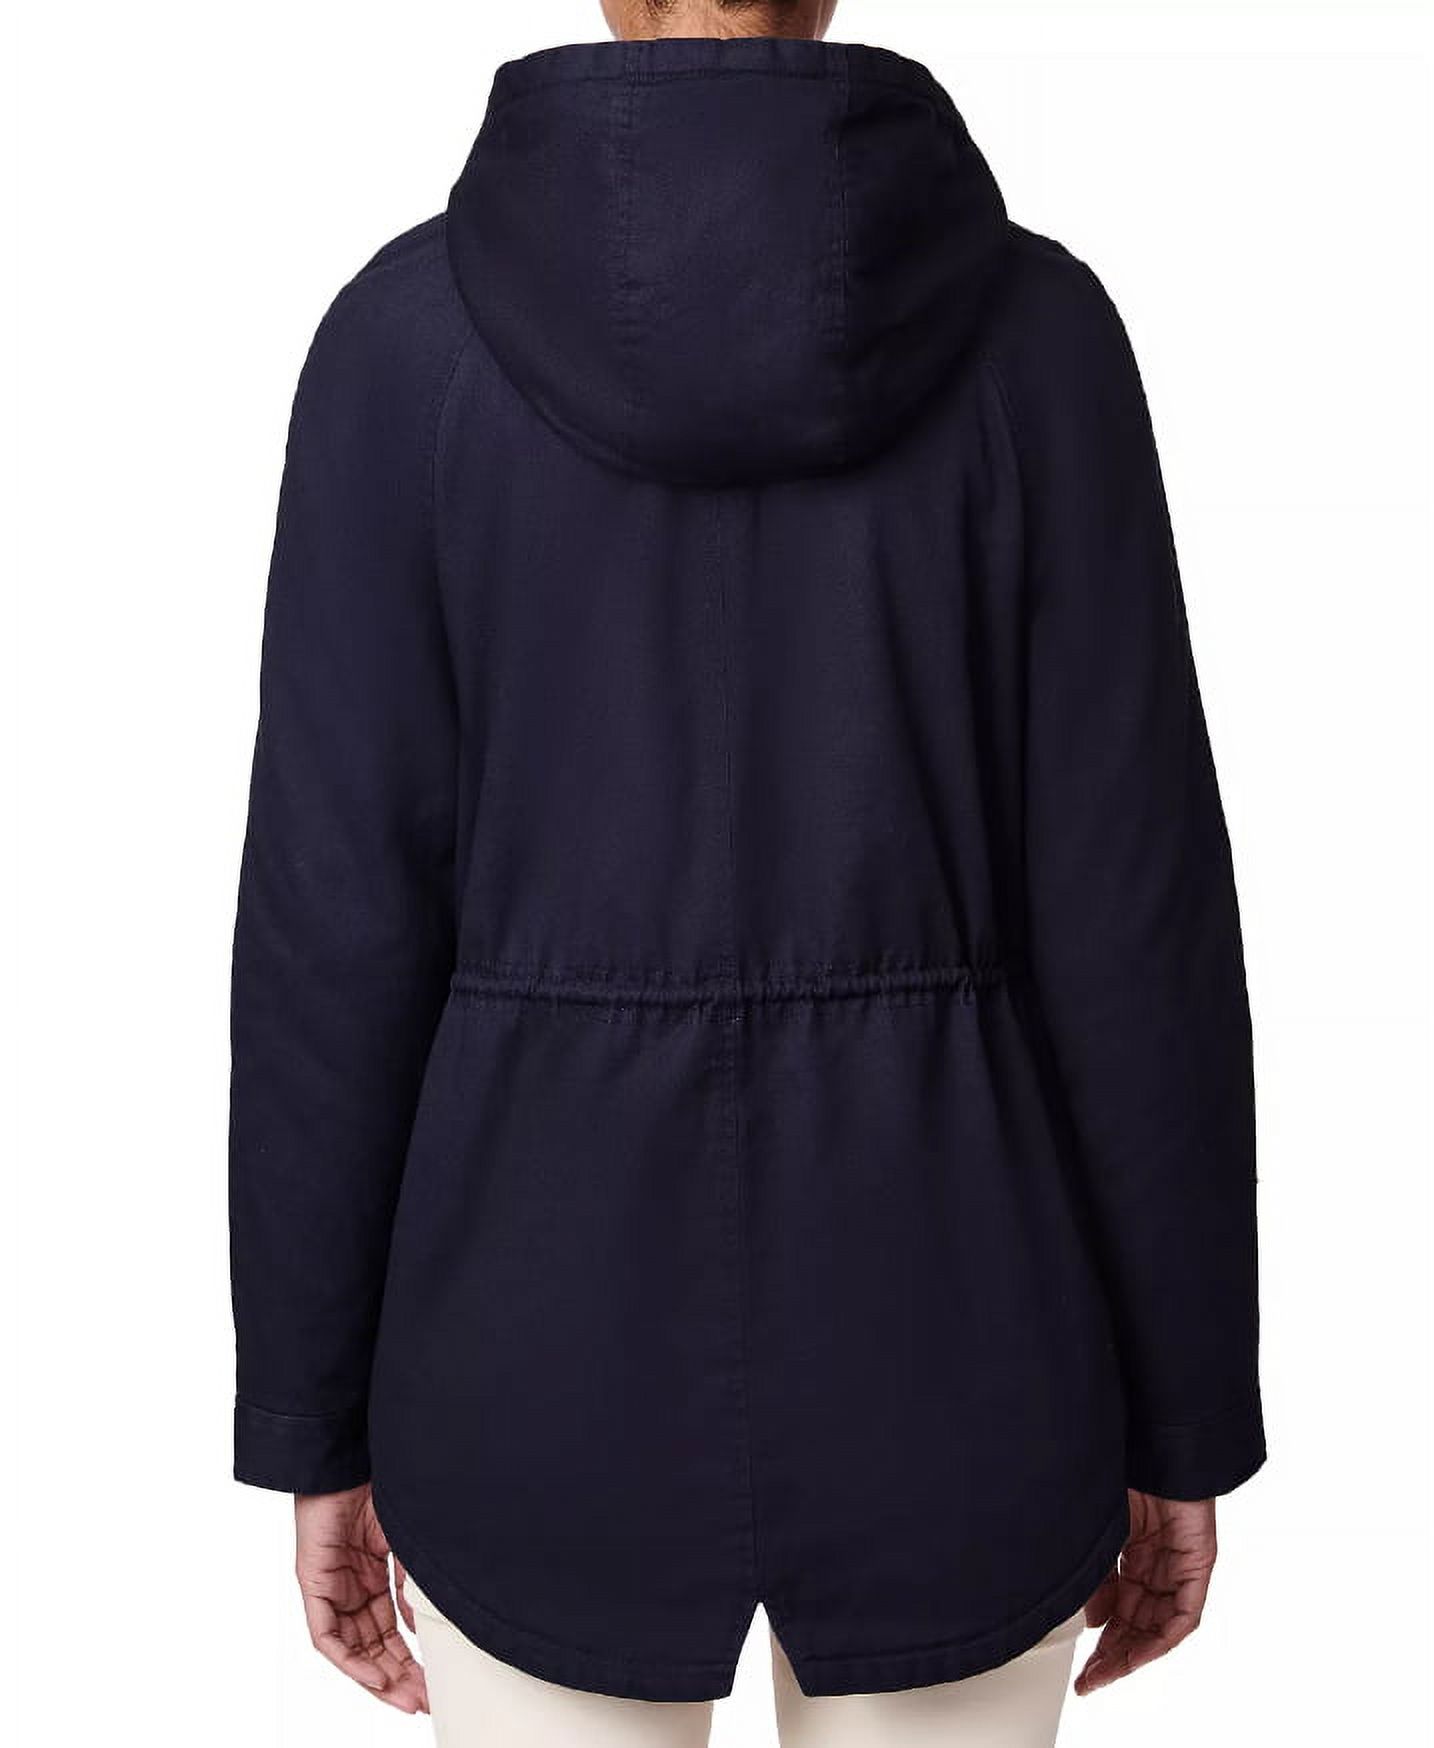 COLLECTIONB Womens Navy Pocketed Zippered Hooded Anorak Button Down Jacket Juniors XS - image 3 of 3